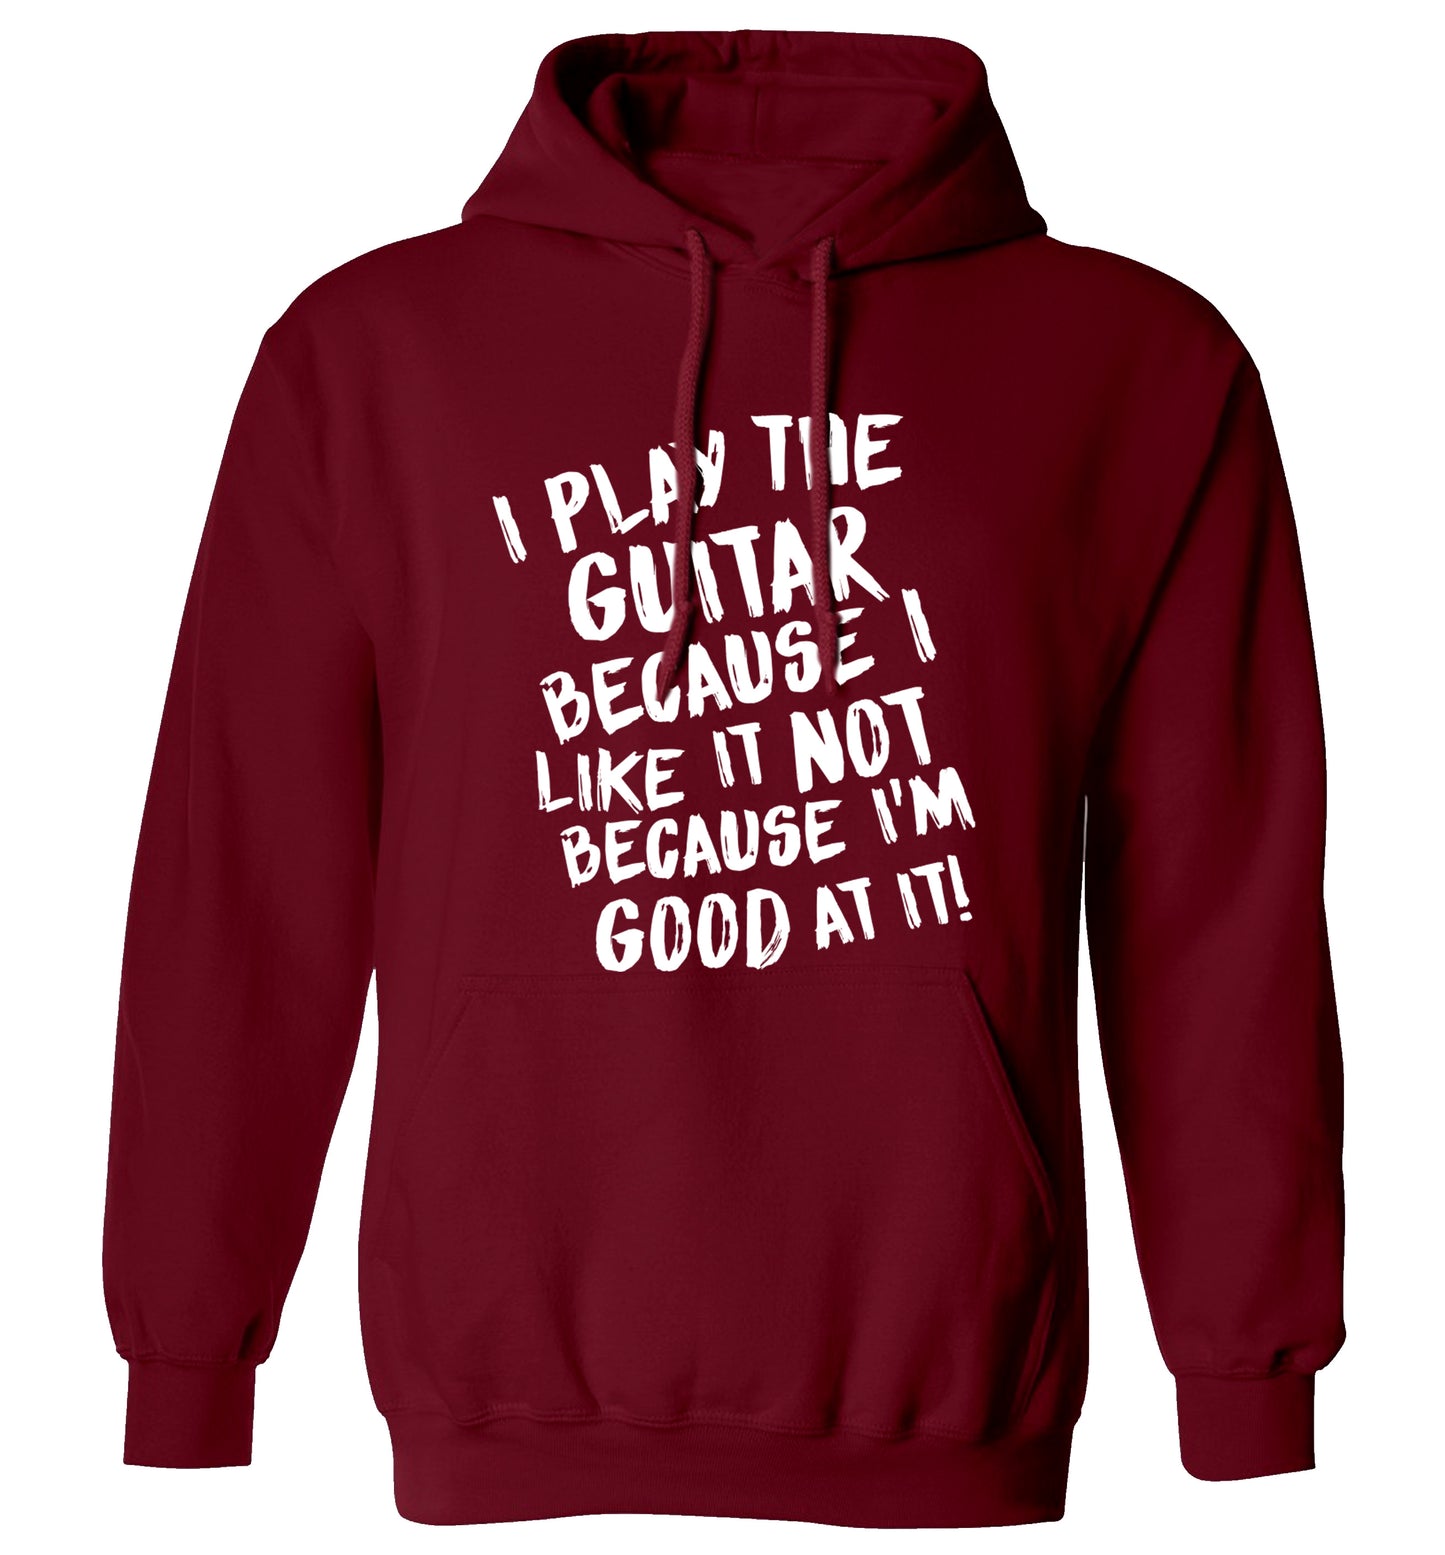 I play the guitar because I like it not because I'm good at it adults unisex maroon hoodie 2XL